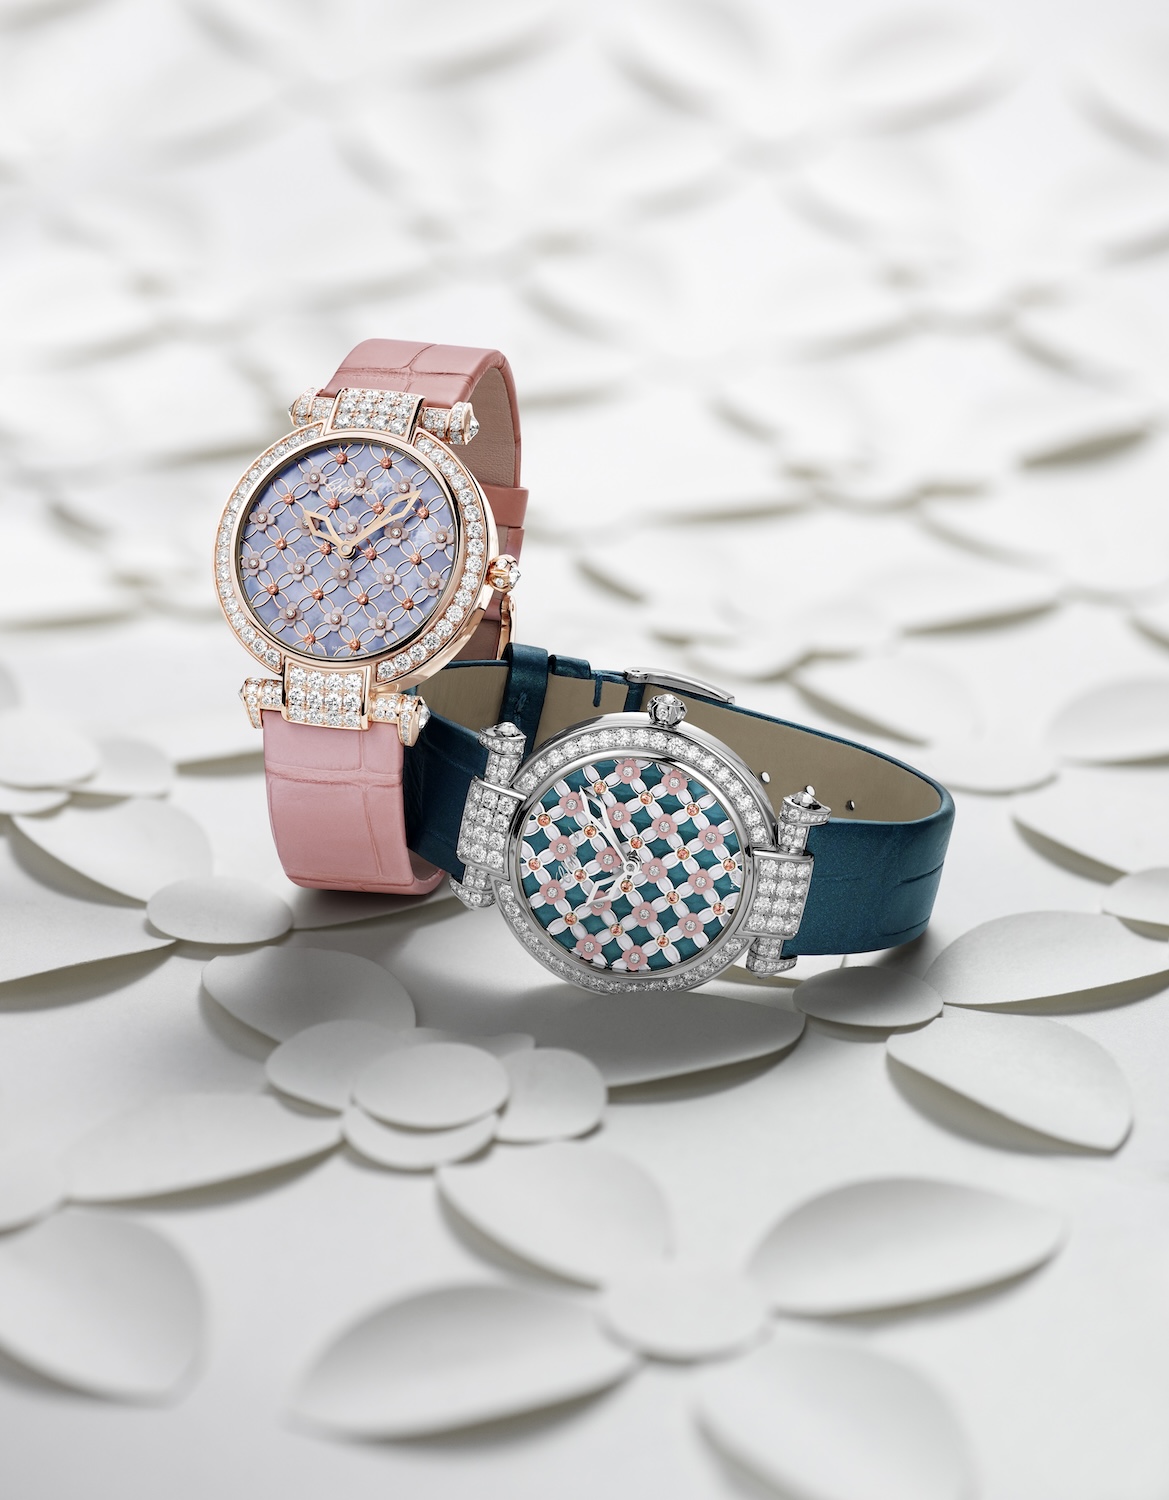 Chopard’s Imperiale Collection in Ethical 18-Carat White or Rose Gold